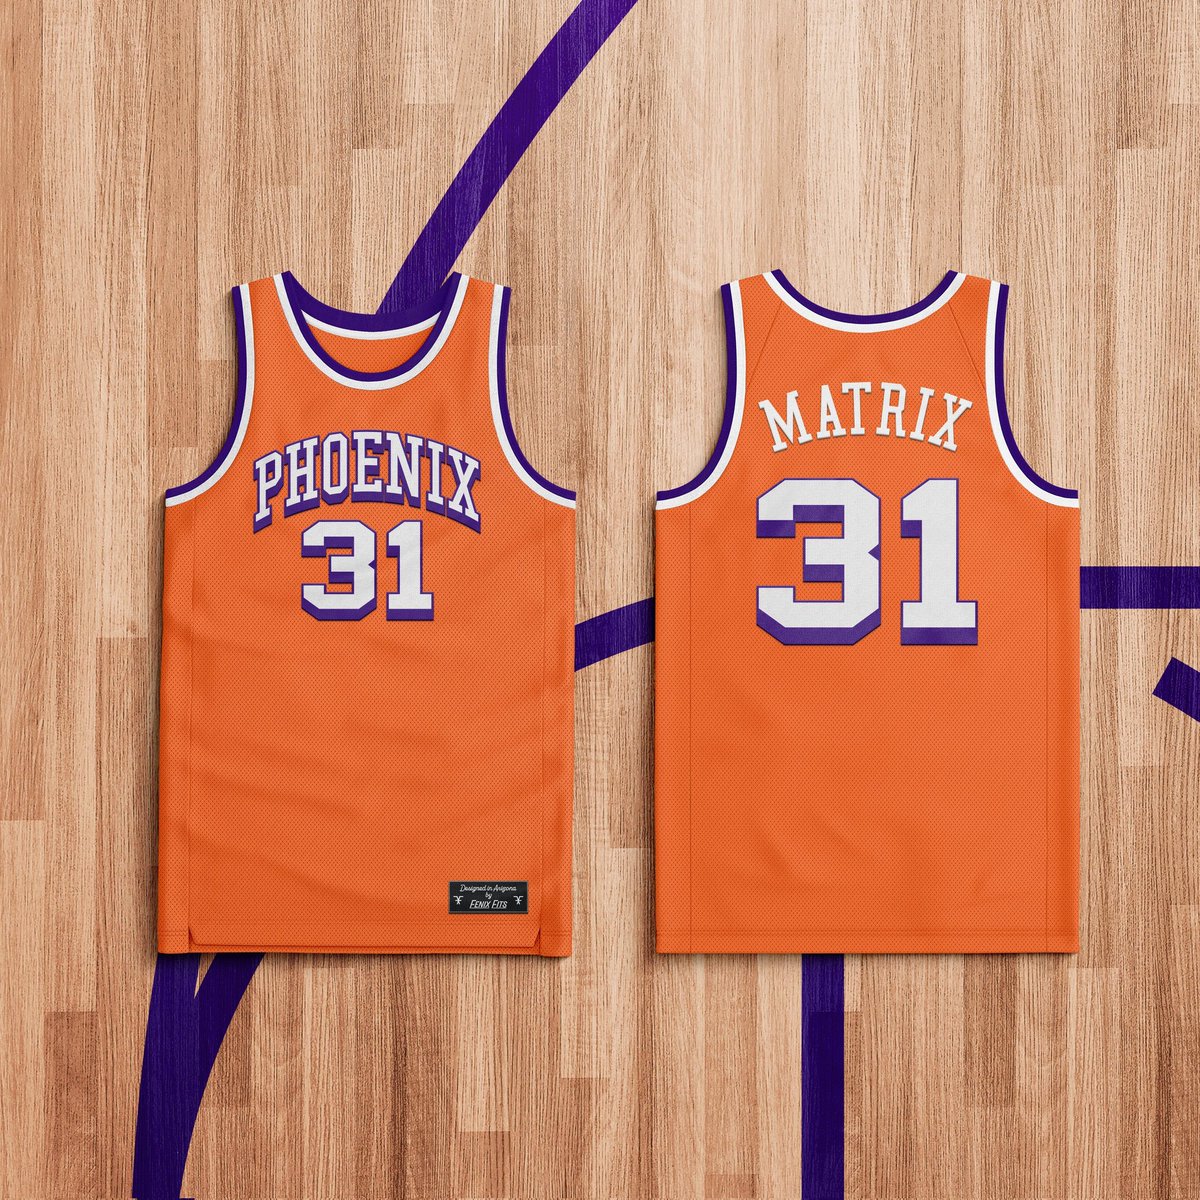 Phoenix Suns City Edition Jerseys El Valle OFFICIALLY LEAKED (My